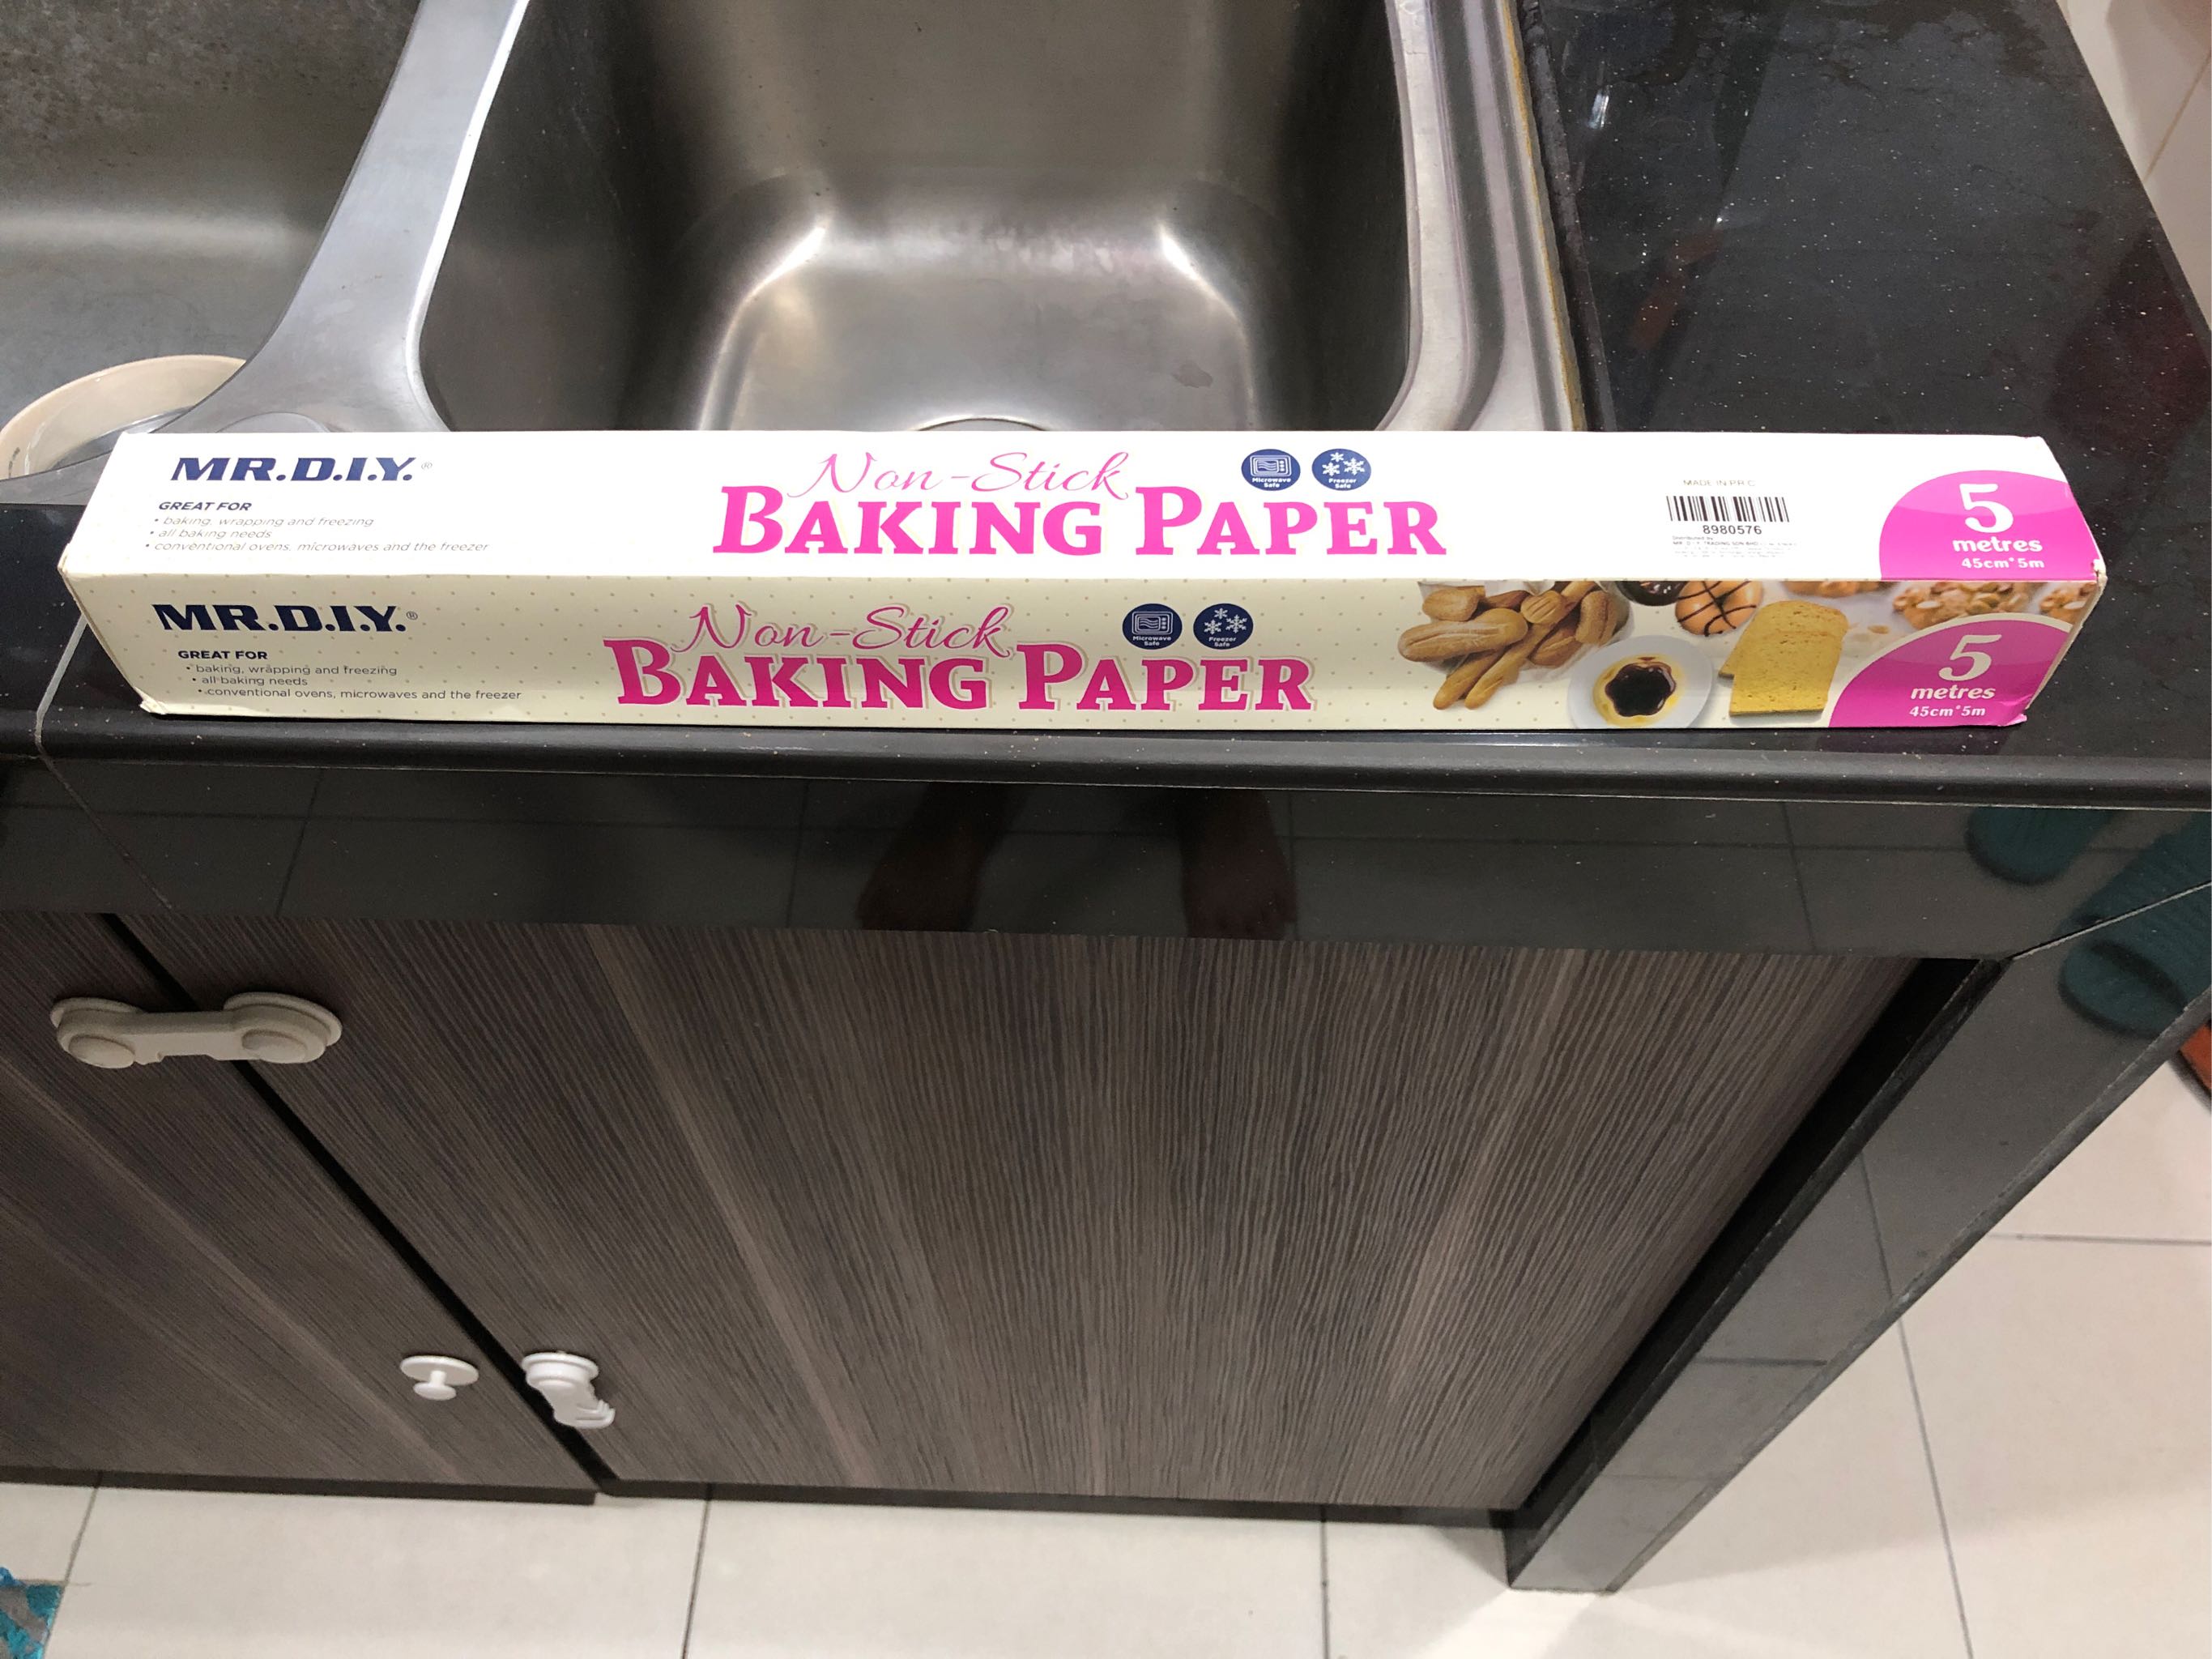 Diy baking paper mr How To